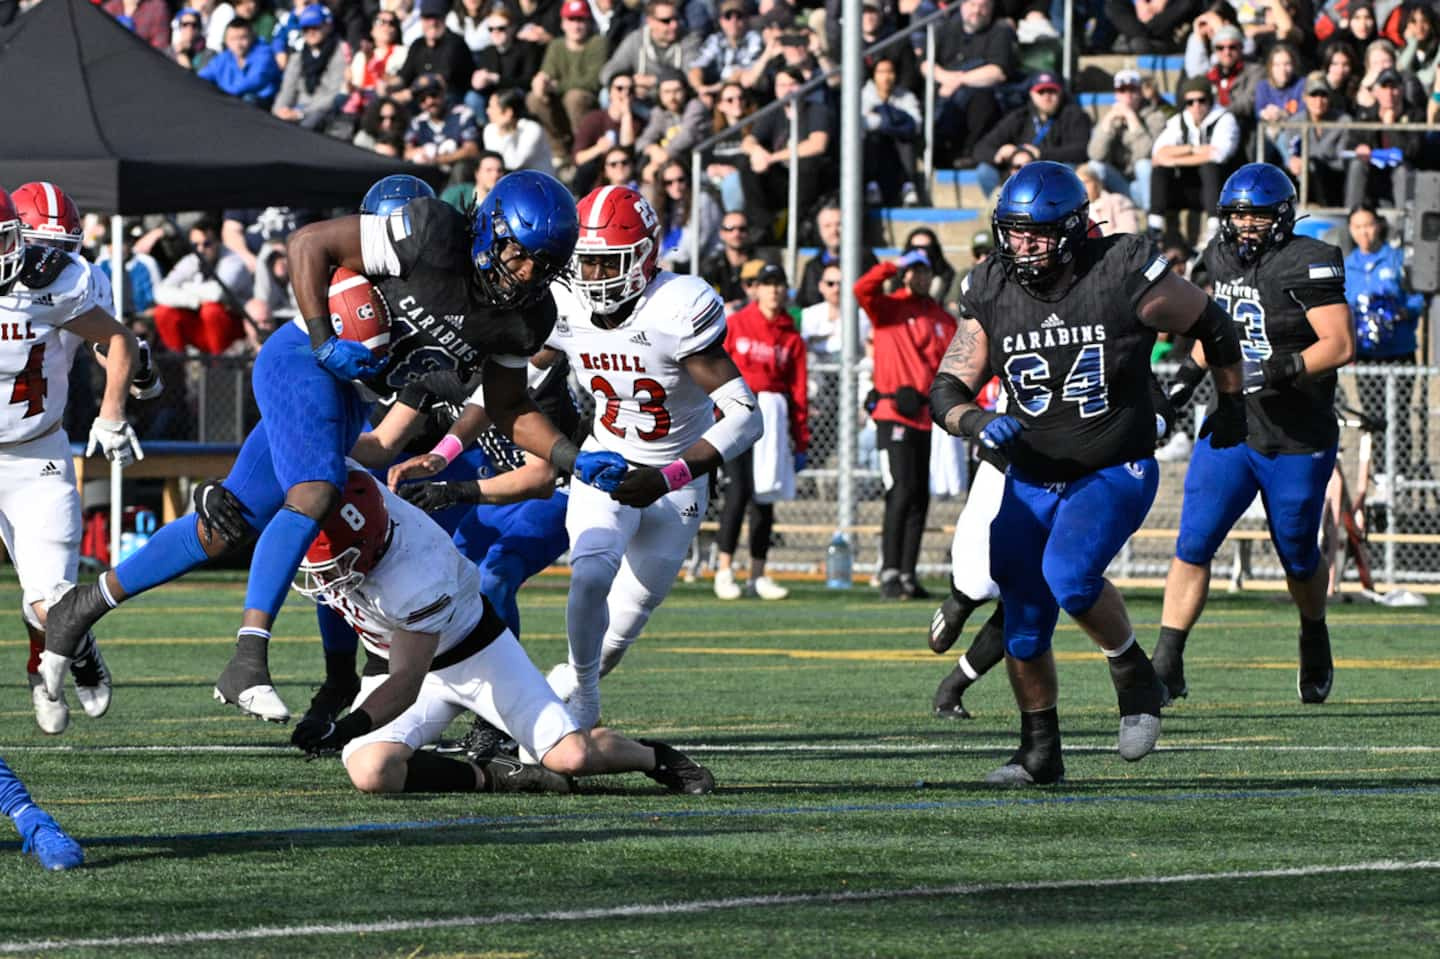 The Carabins find their way back to victory